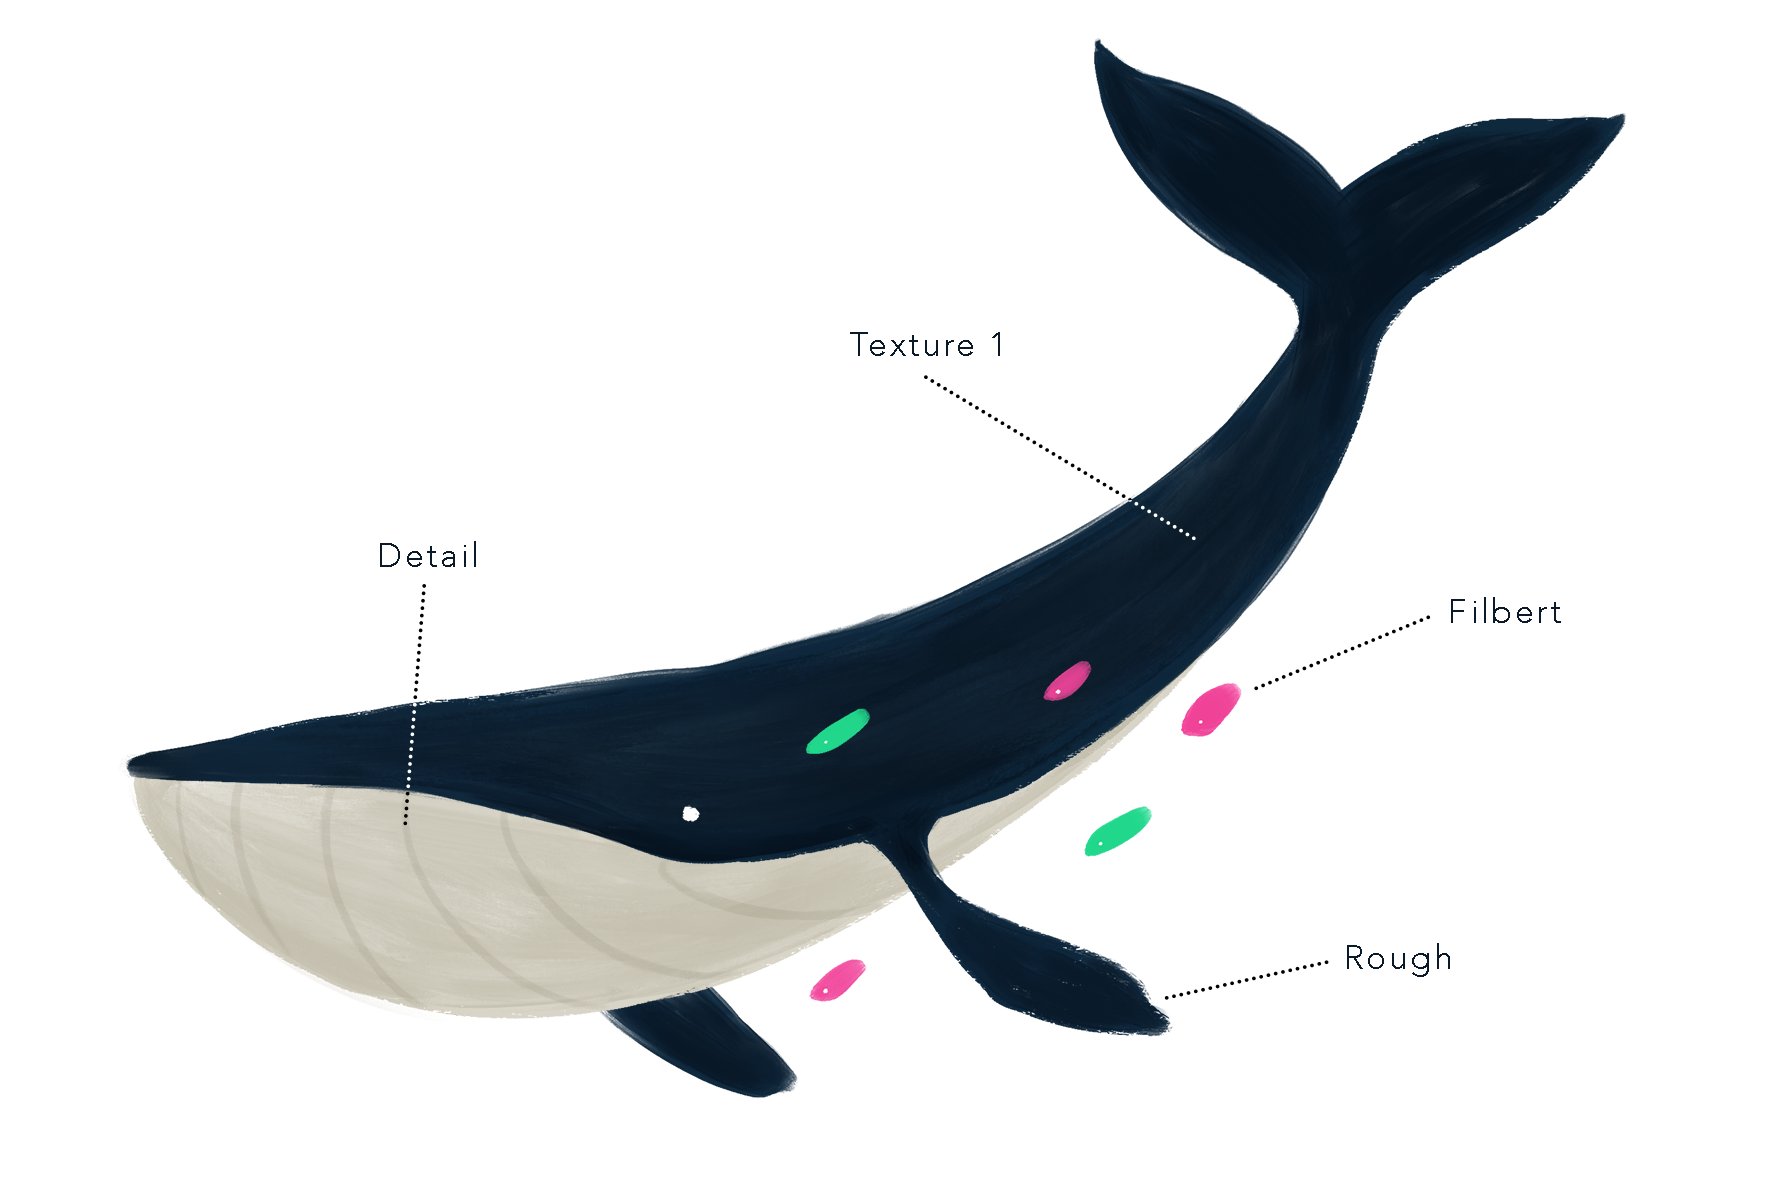 Some colorful spots for the whale.